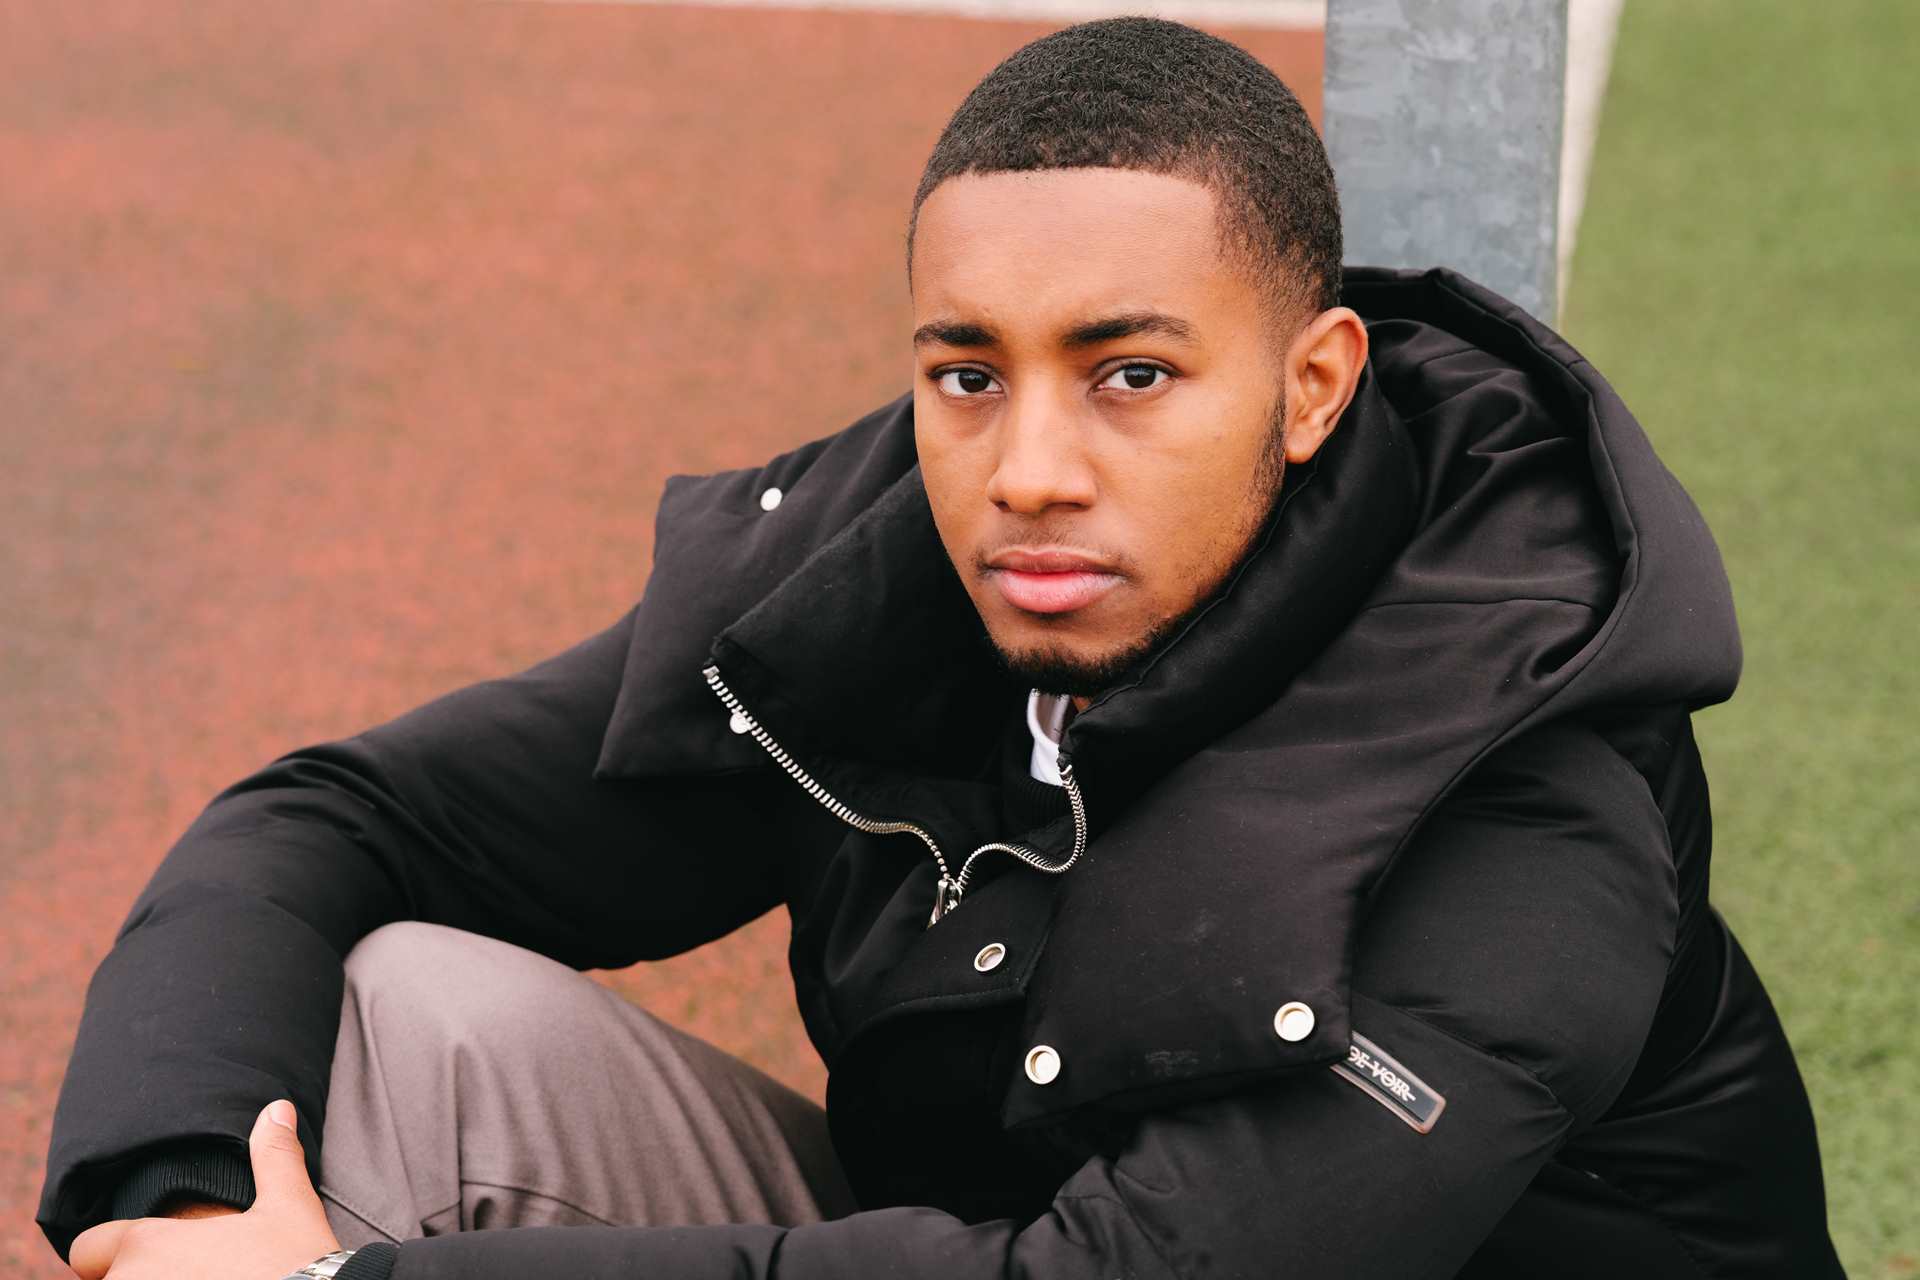 A young Black man sitting on the ground in the park and staring into the camera.